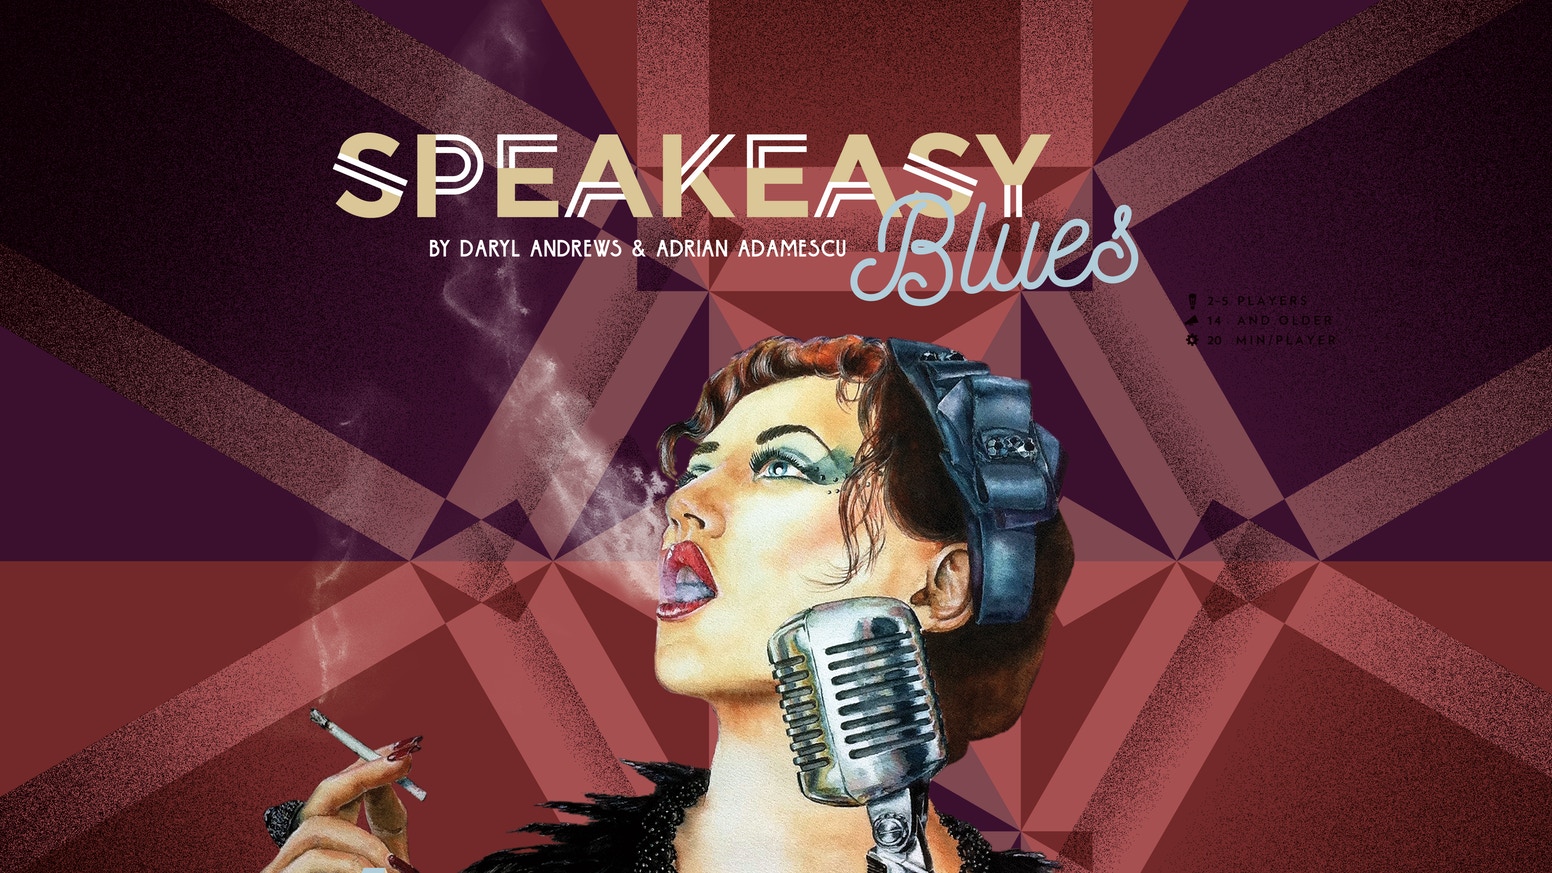 Box cover art for the board game Speakeasy Blues